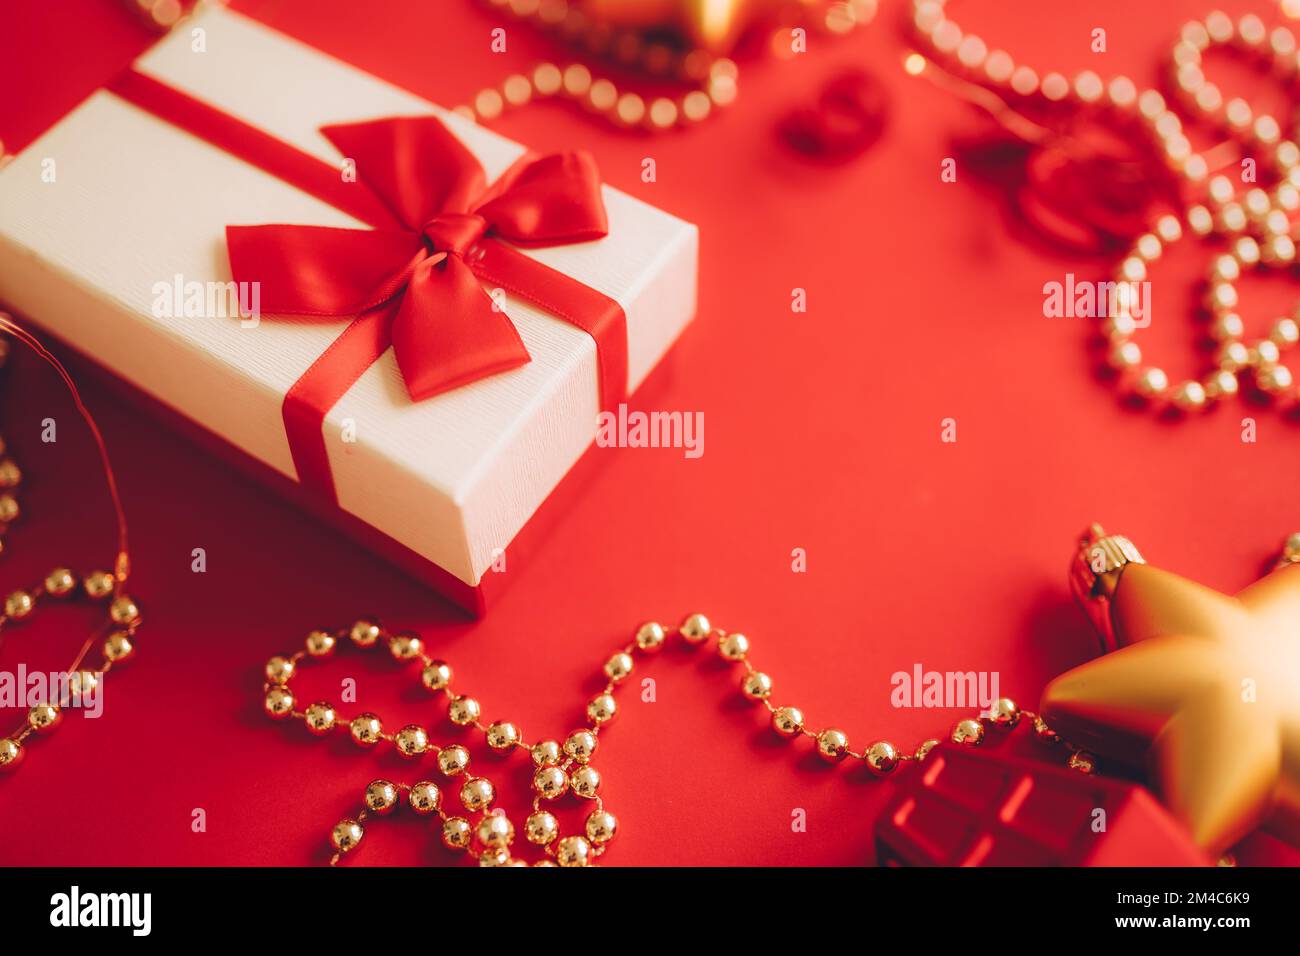 Christmas Decoration Objects and Gift Box as Holiday Background. Stock Photo